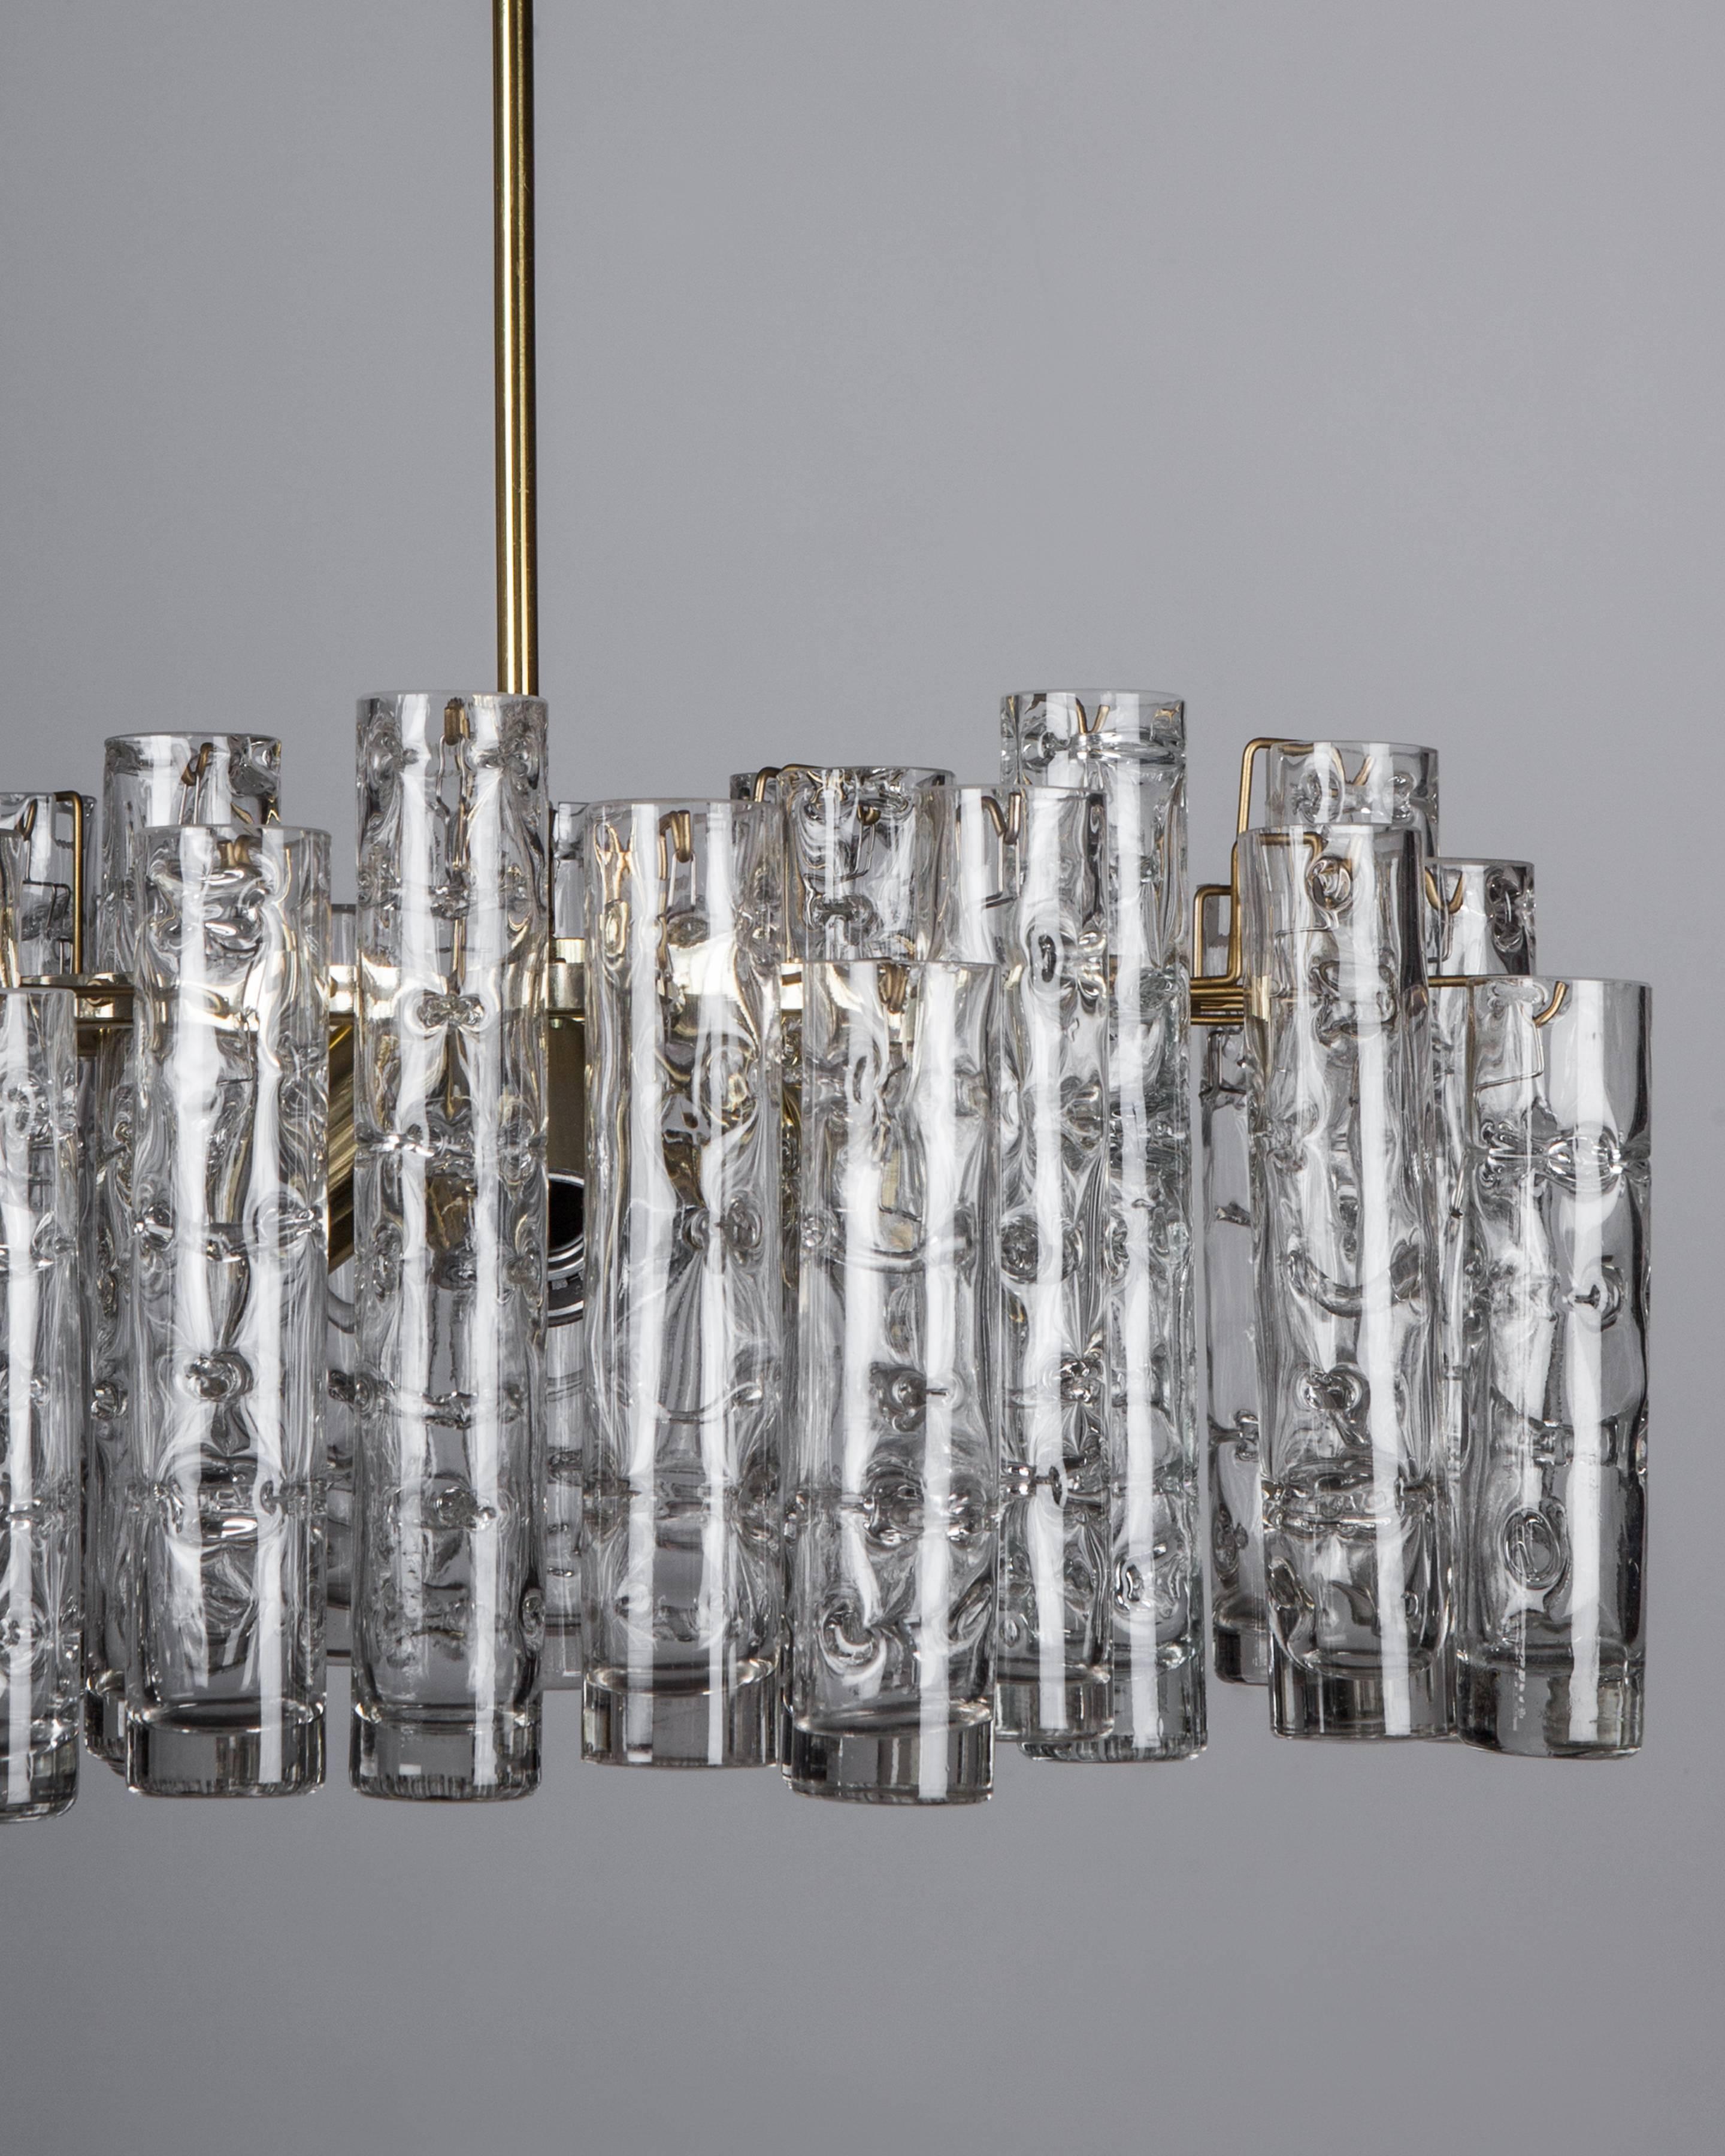 AHL4052
A vintage chandelier with textured blown glass tube prisms staggered on a frame in its original aluminum and aged brass finish. Signed by the German maker Doria. Due to the antique nature of this fixture, there may be some nicks or